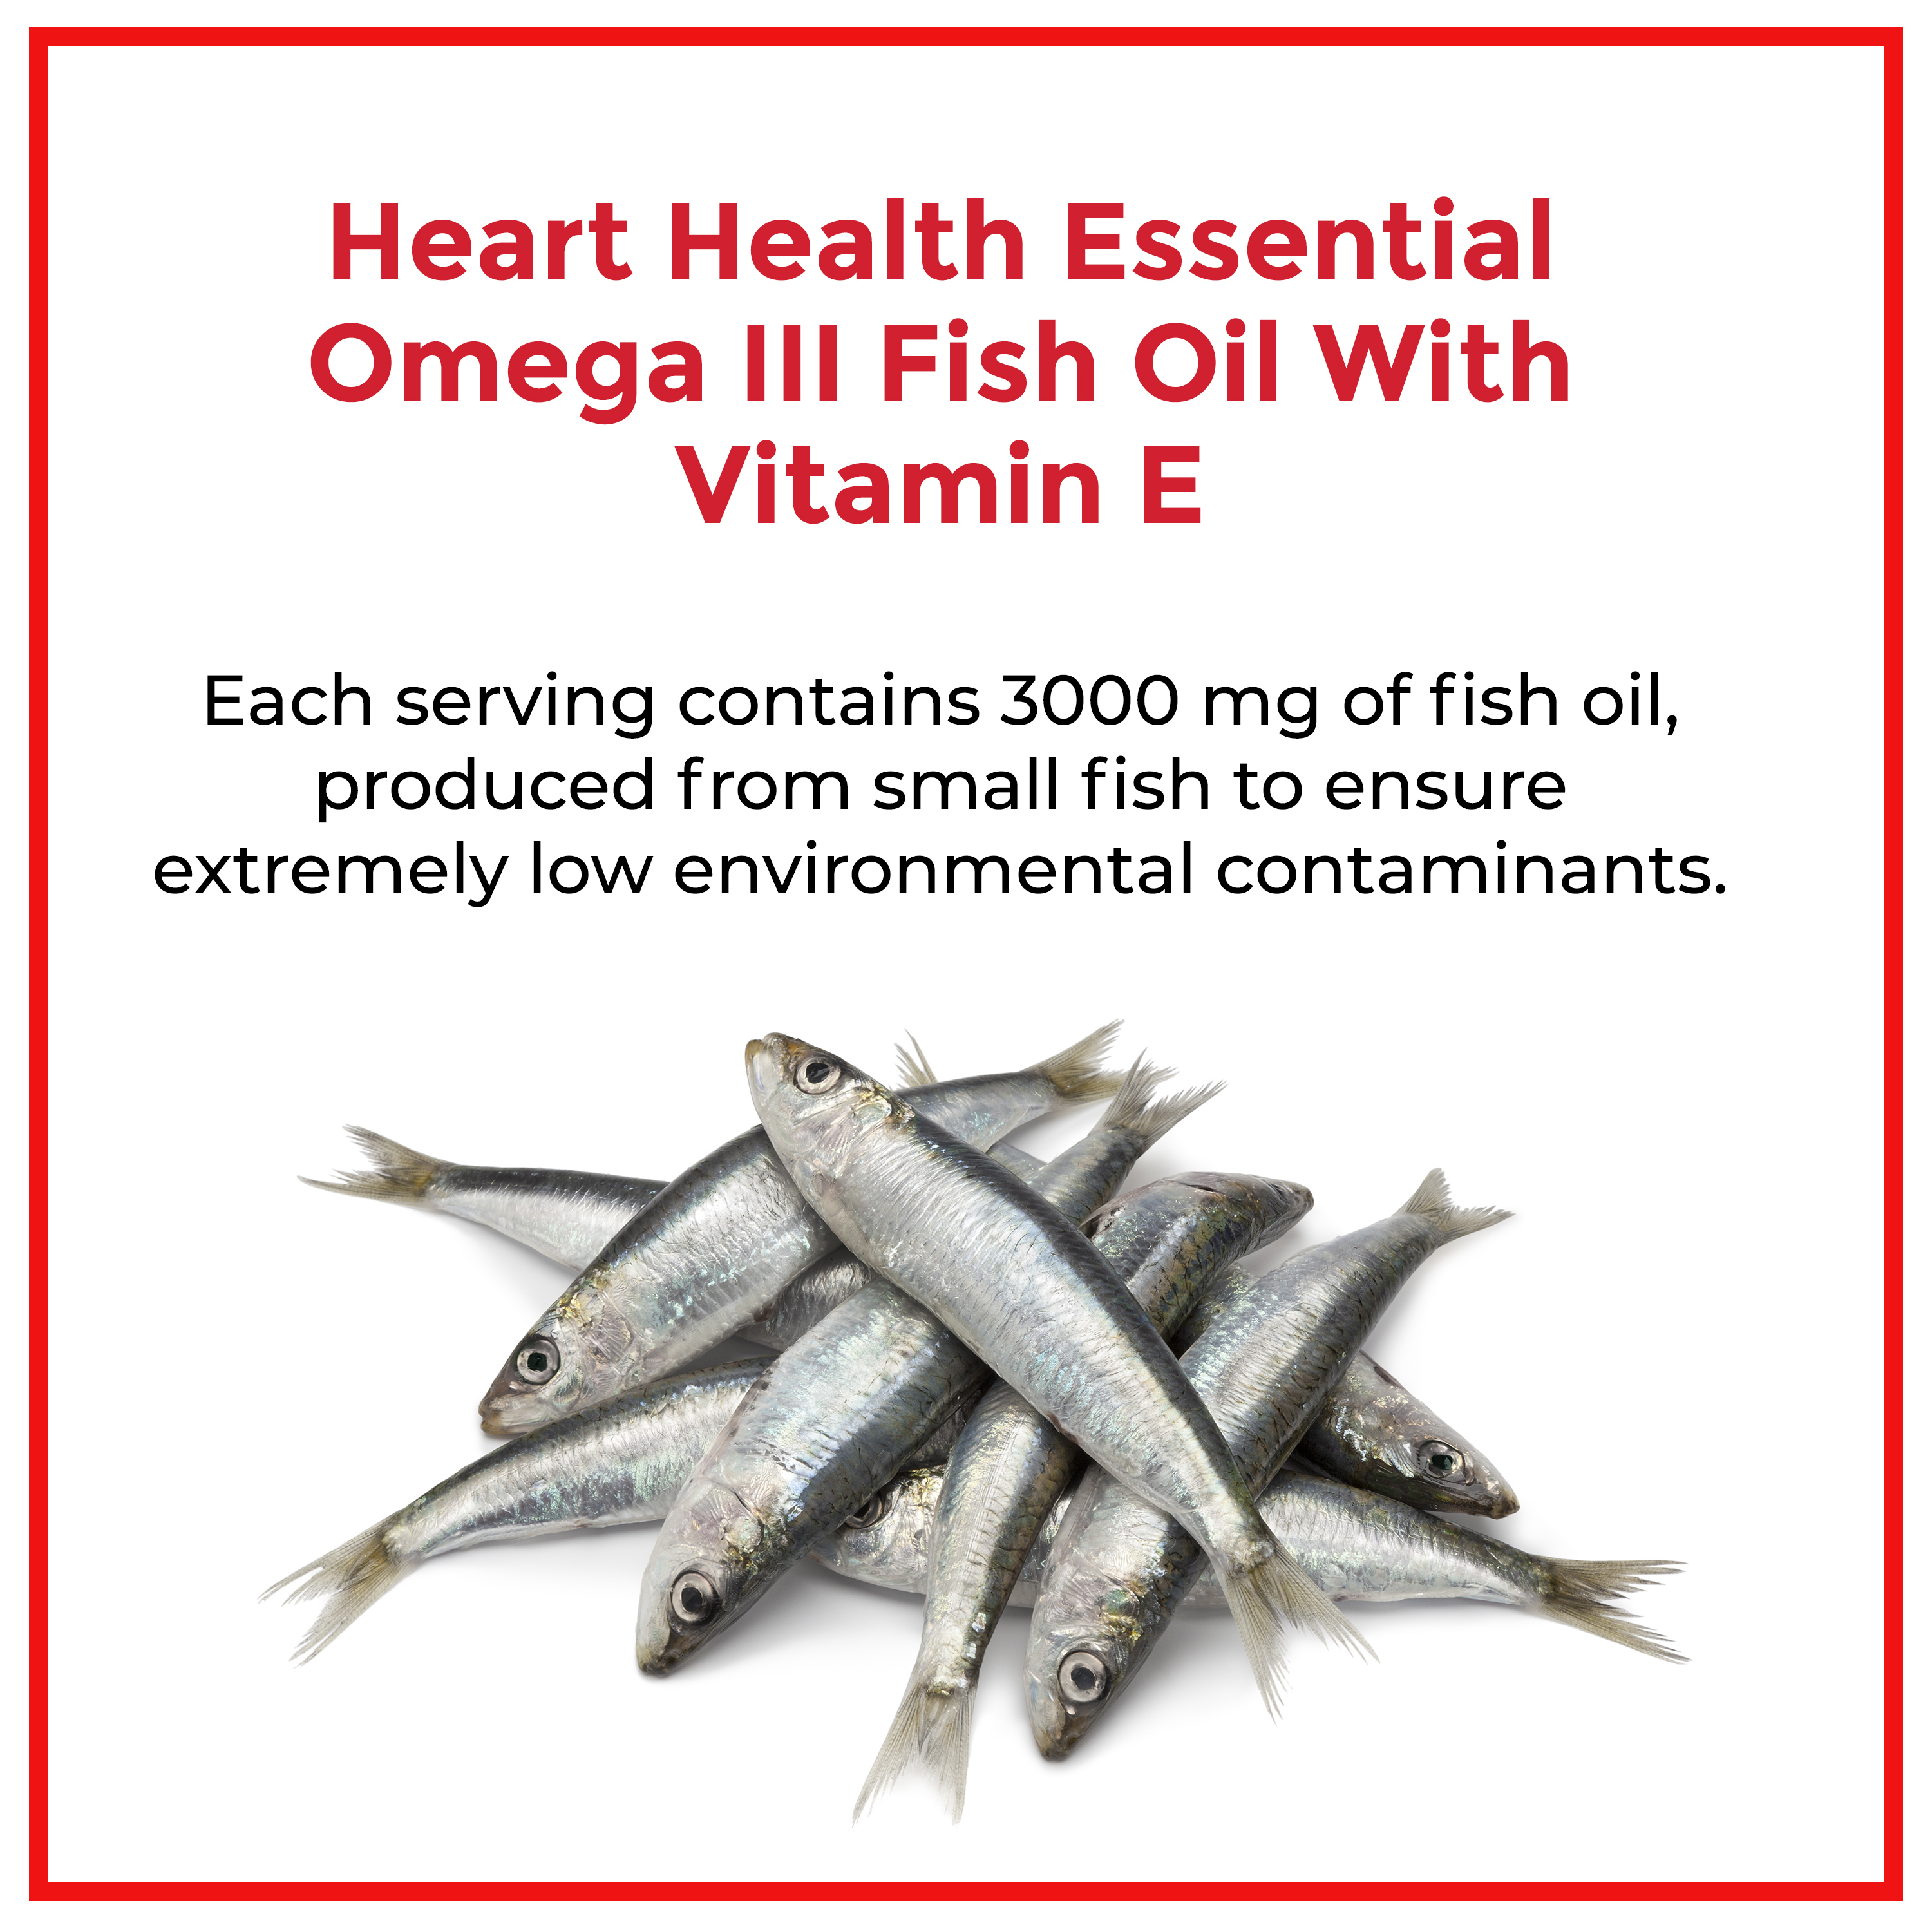 Heart Health Essential Omega III Fish Oil with Vitamin E. Each serving contains 3000 mg fish oil, from small fish for extremely low environmental contaminants.